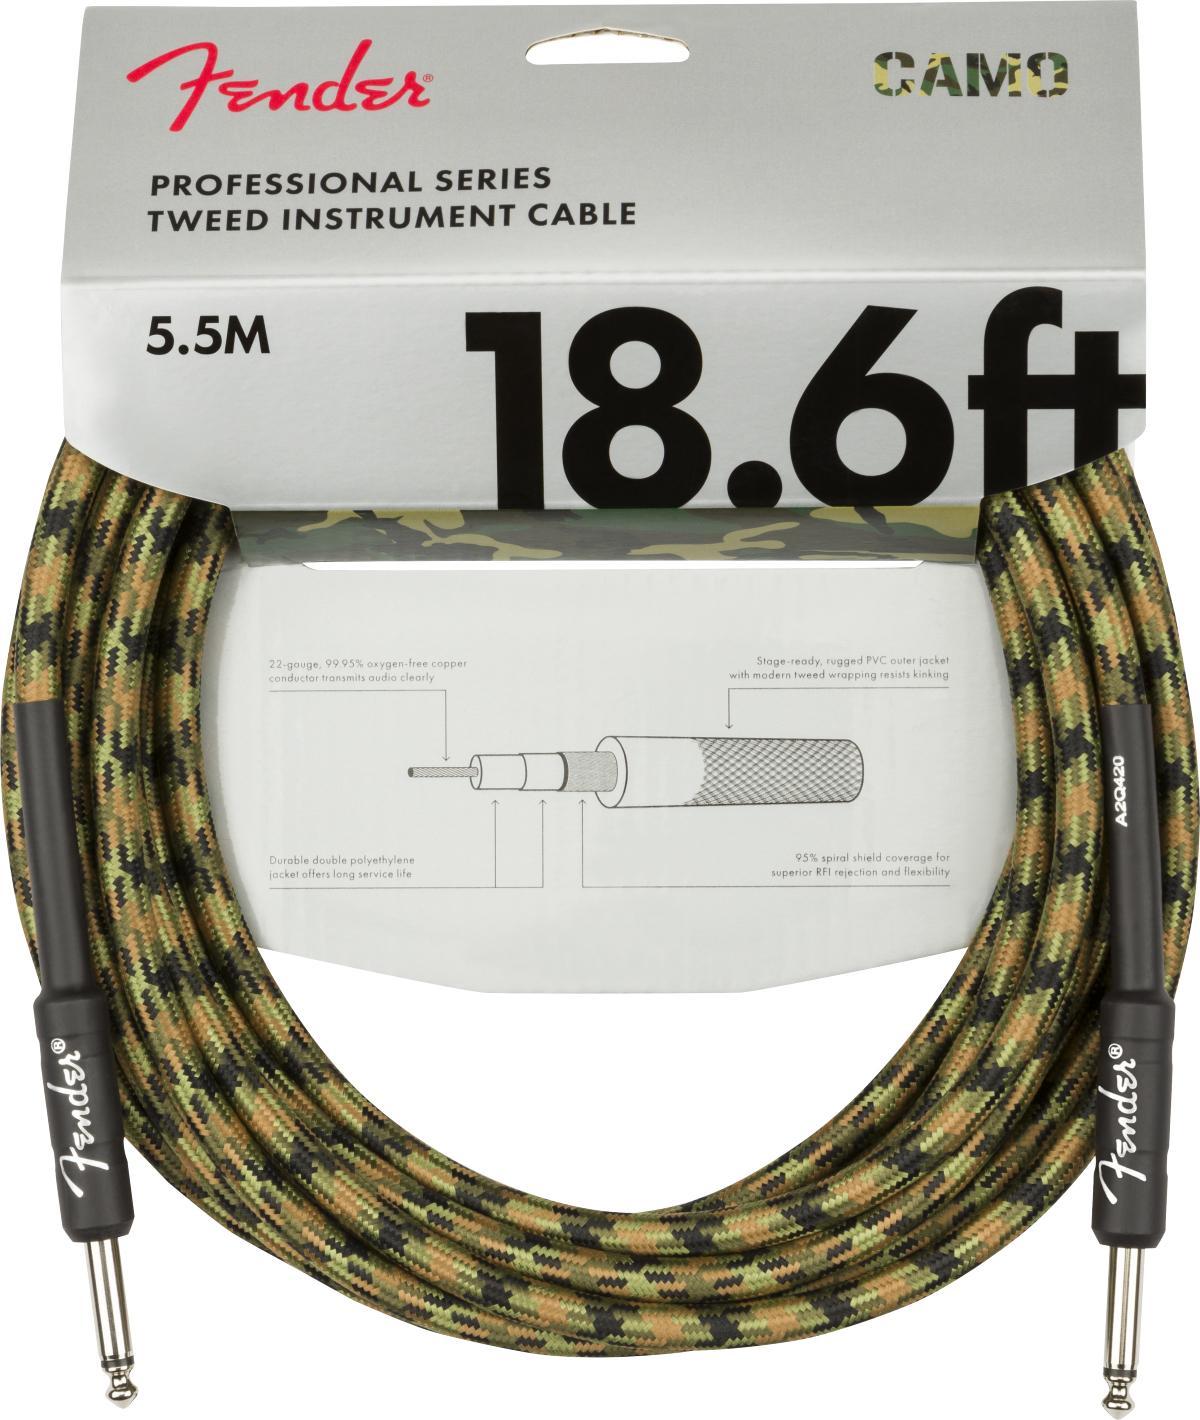 Cable Fender Professional Series Instrument Cable, Straight/Straight, 18.6ft - Woodland Camo